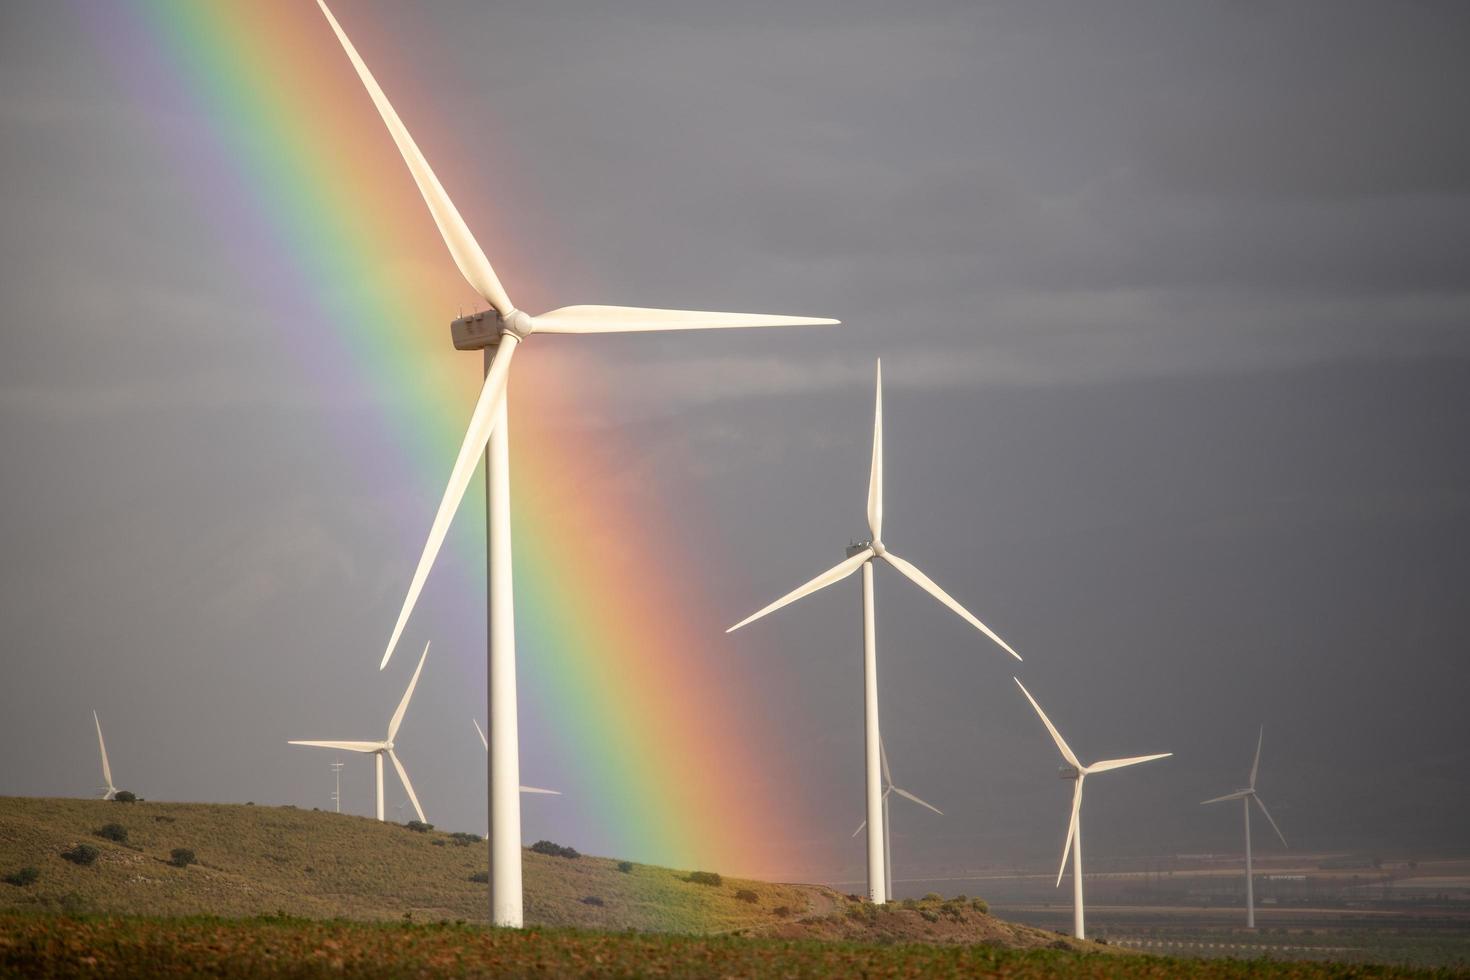 Wind power mills in a storm with cloudy gray skies and a rainbow photo